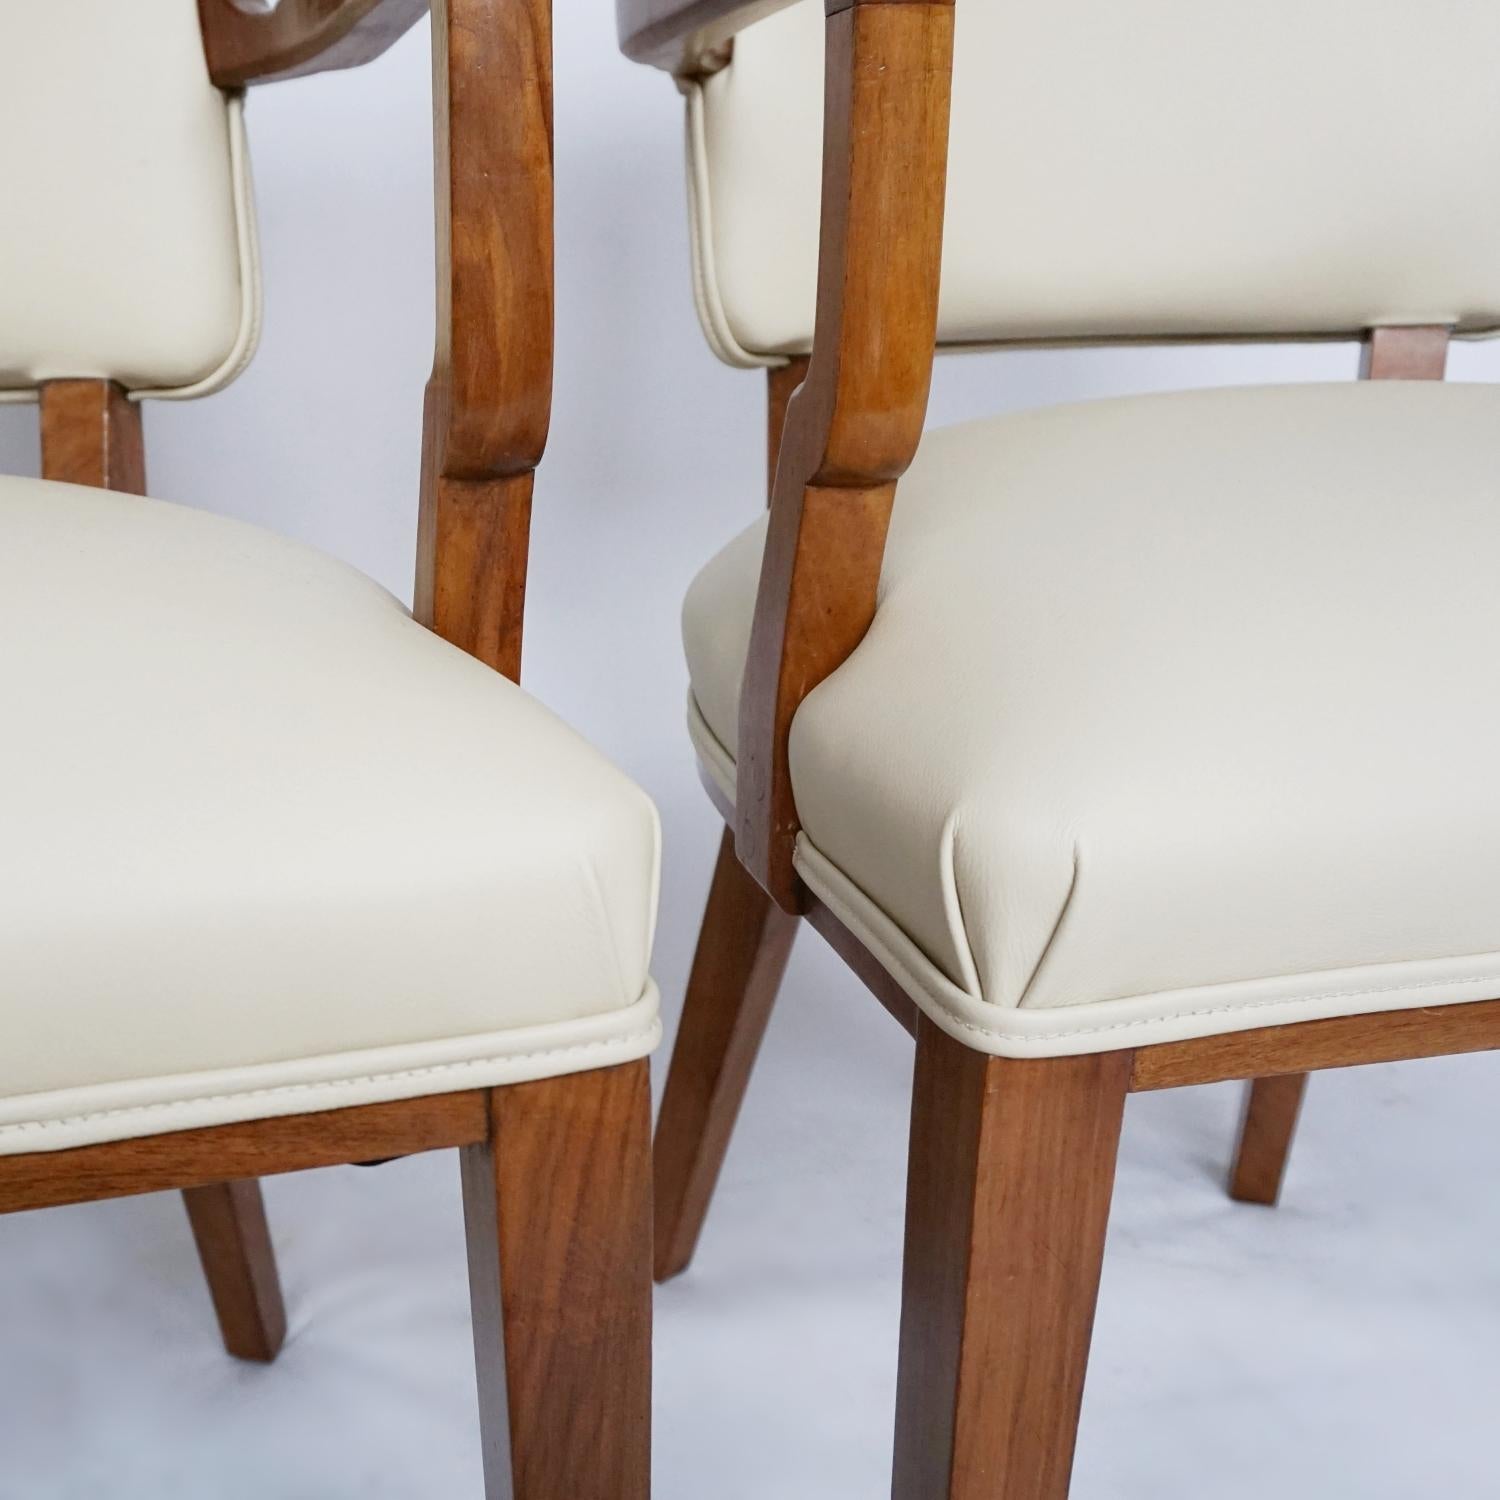 A pair of Art Deco desk chairs by Heal's of London. Solid and veneered walnut throughout. Re-upholstered in cream leather. 

Dimensions: H 85cm, W 53cm, D 47cm Seat H 49cm Seat D 45cm

Origin: English

Date: Circa 1935

Item No: